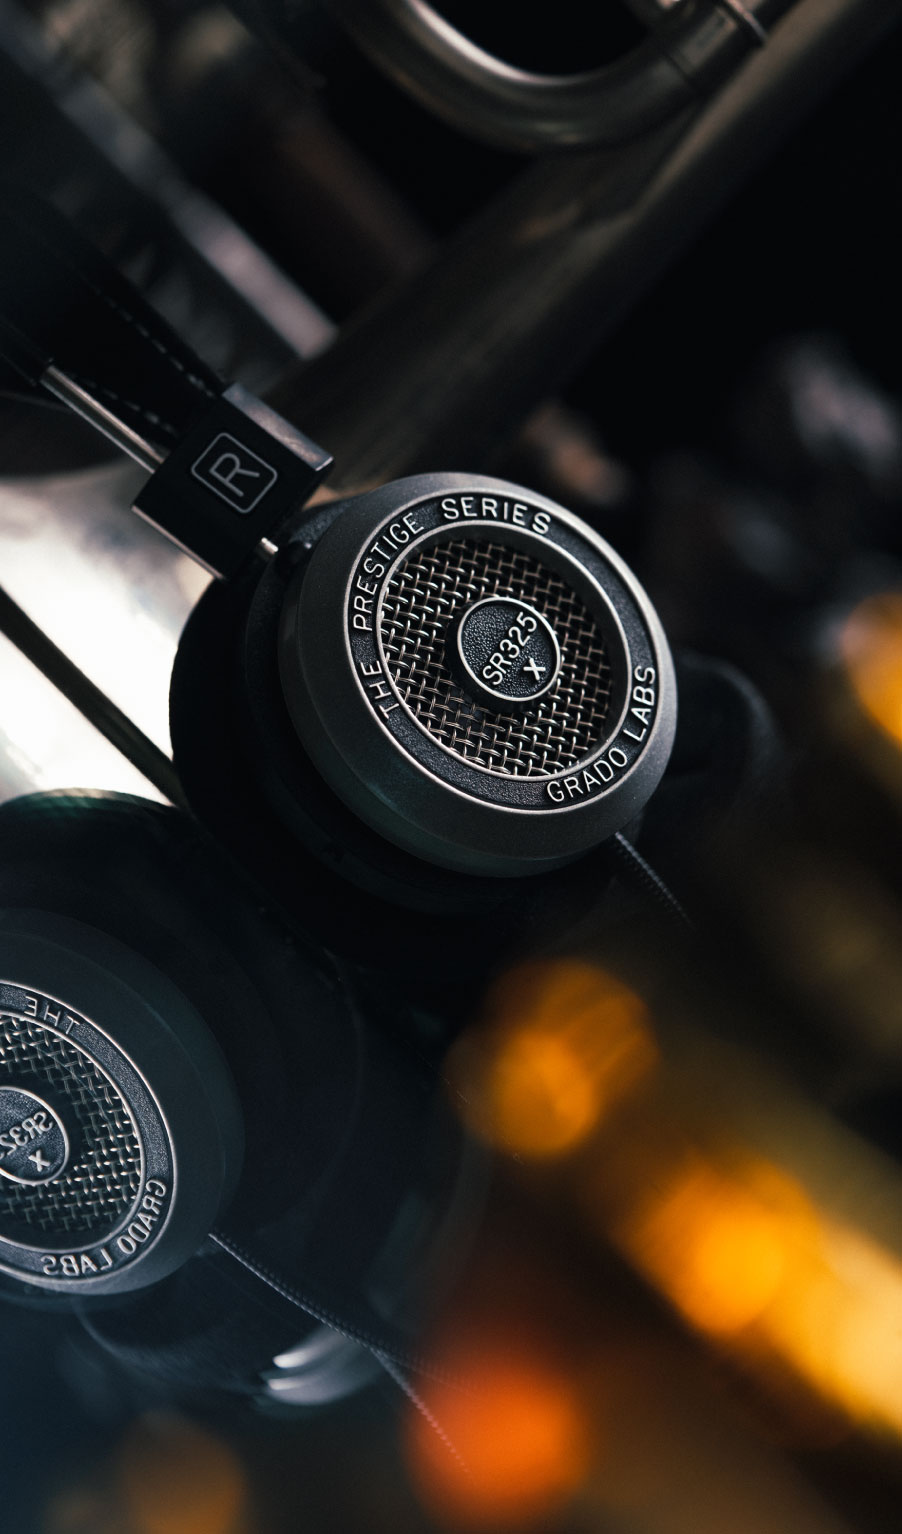 Photo of SR325x headphones with a blurred background.